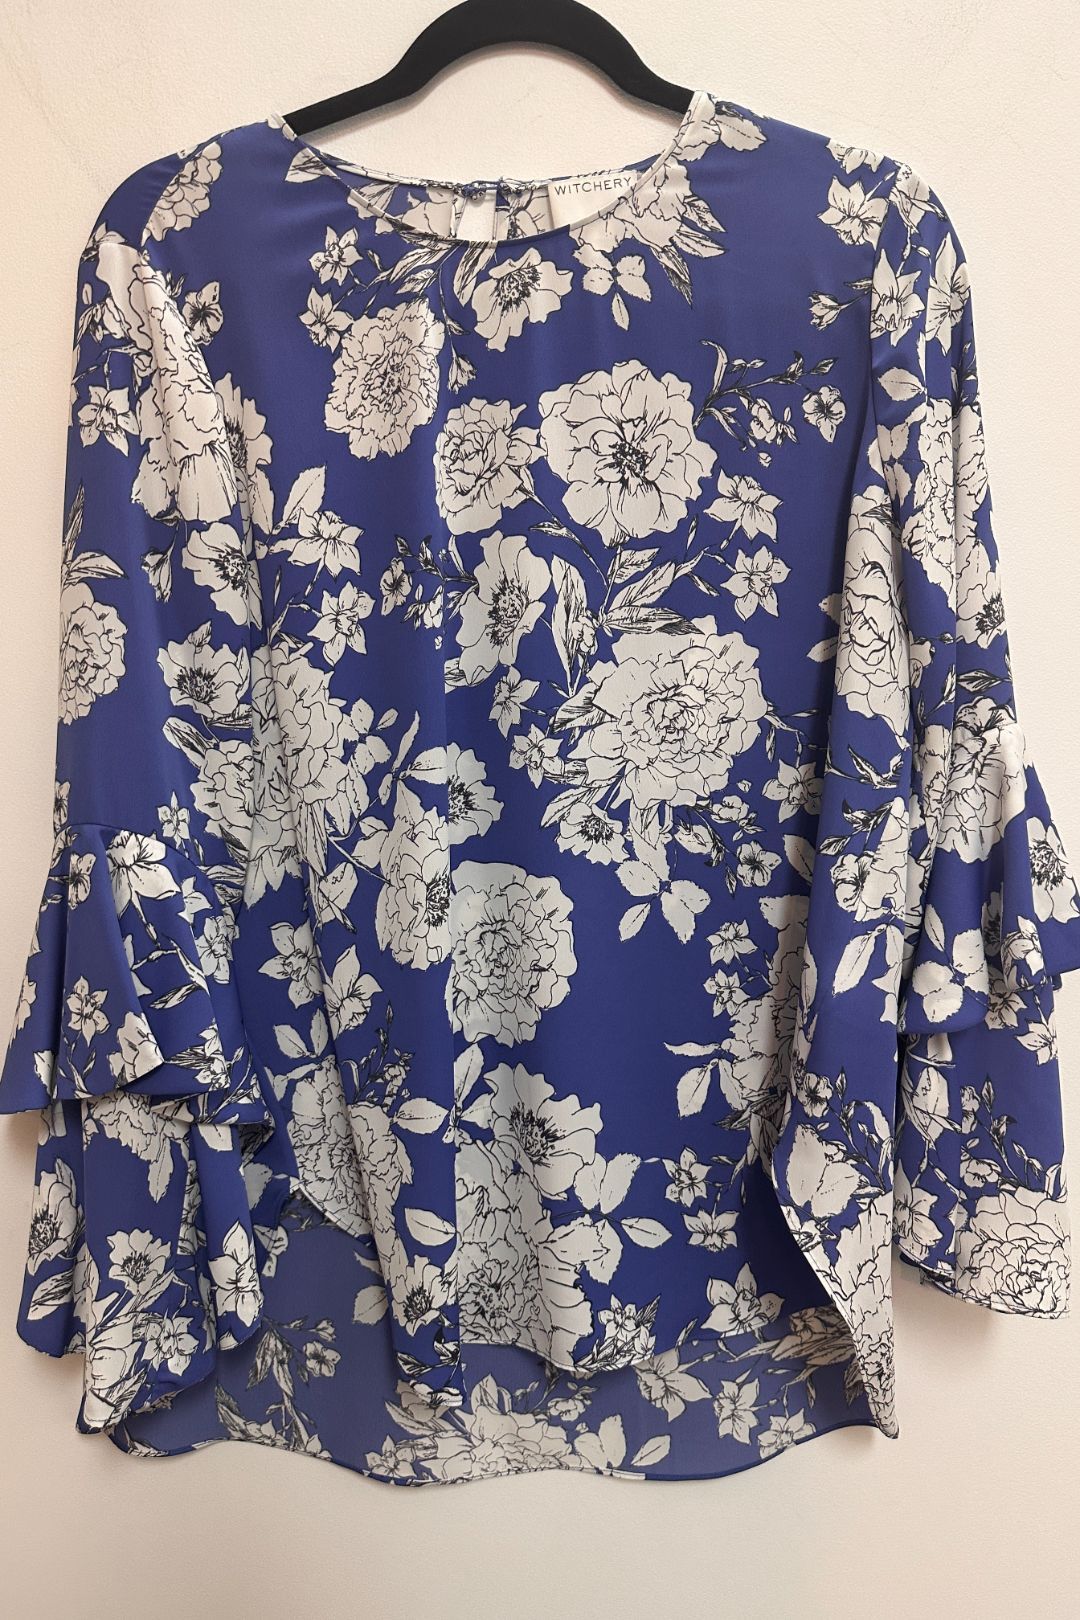 Witchery Blue Floral Print Blouse